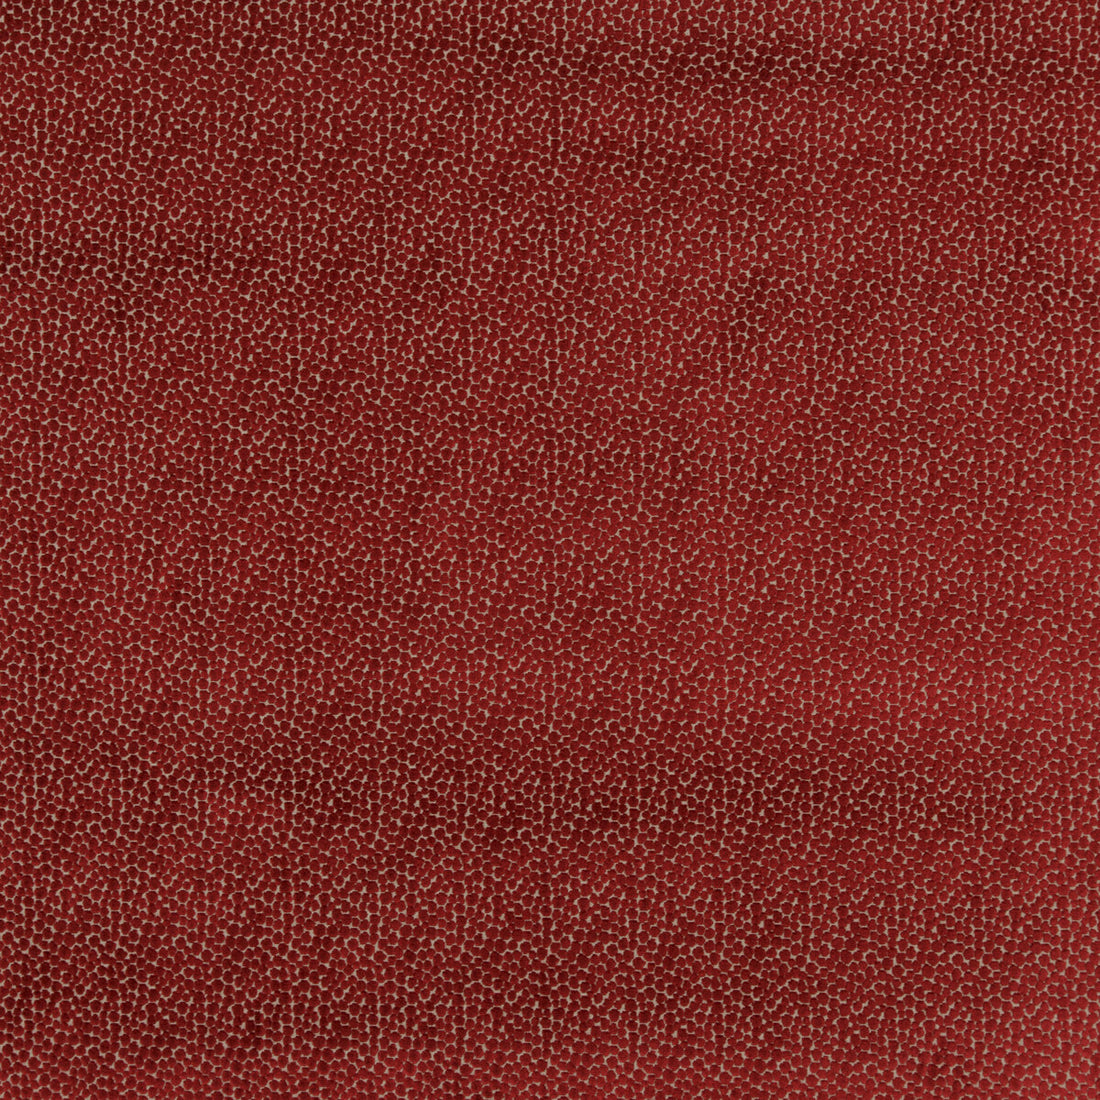 Salsa Spot fabric in red color - pattern PF50423.450.0 - by Baker Lifestyle in the Carnival collection